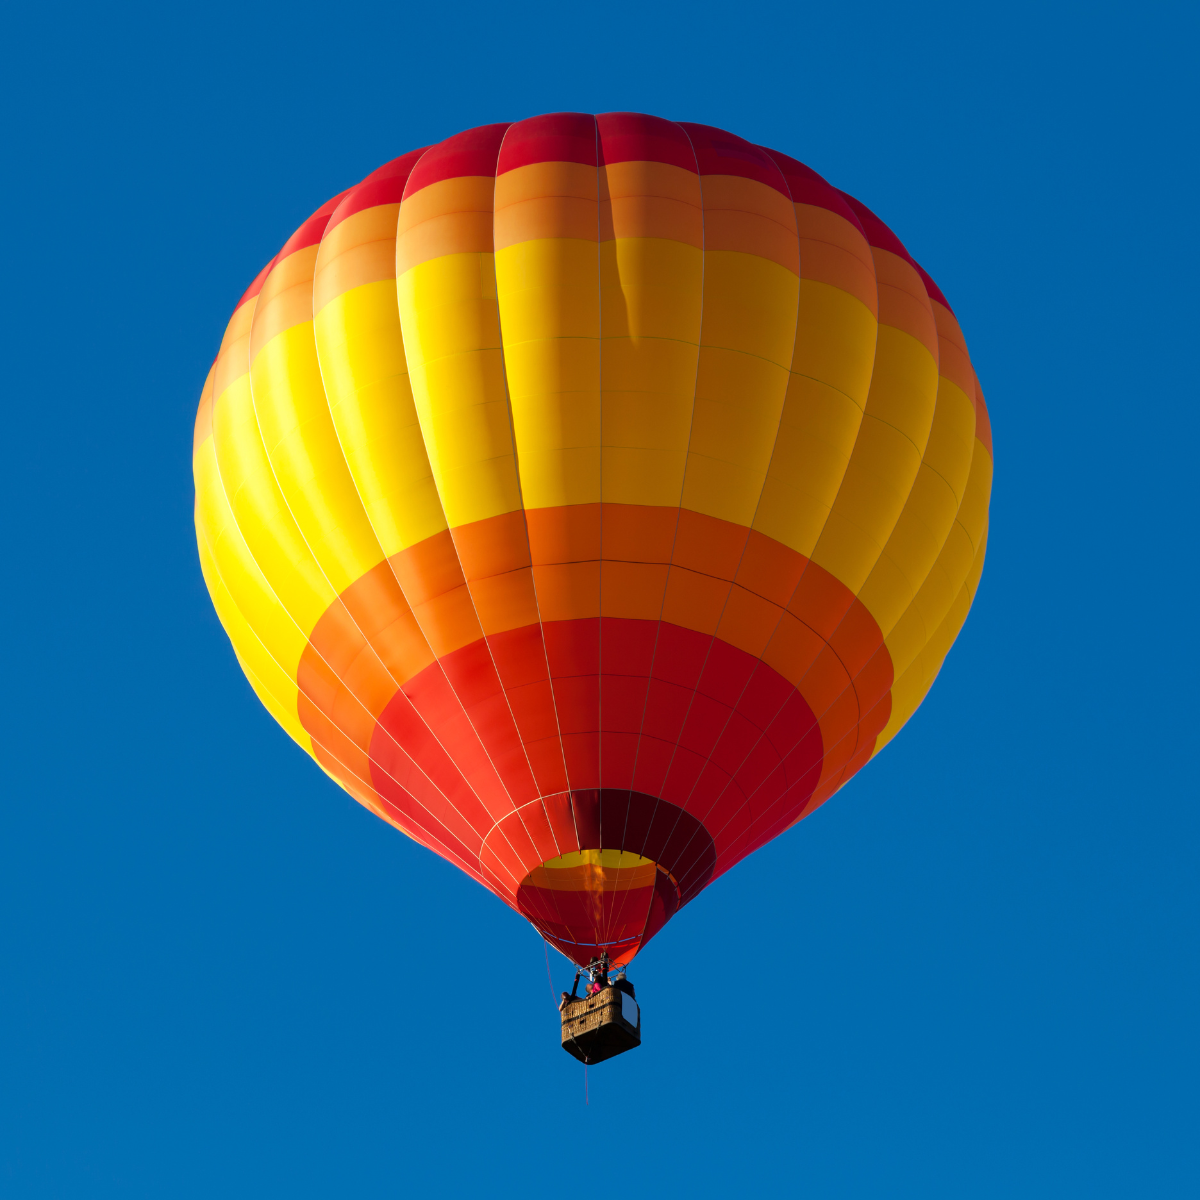 15. Take Your Love to New Heights with a Romantic Hot Air Balloon Ride